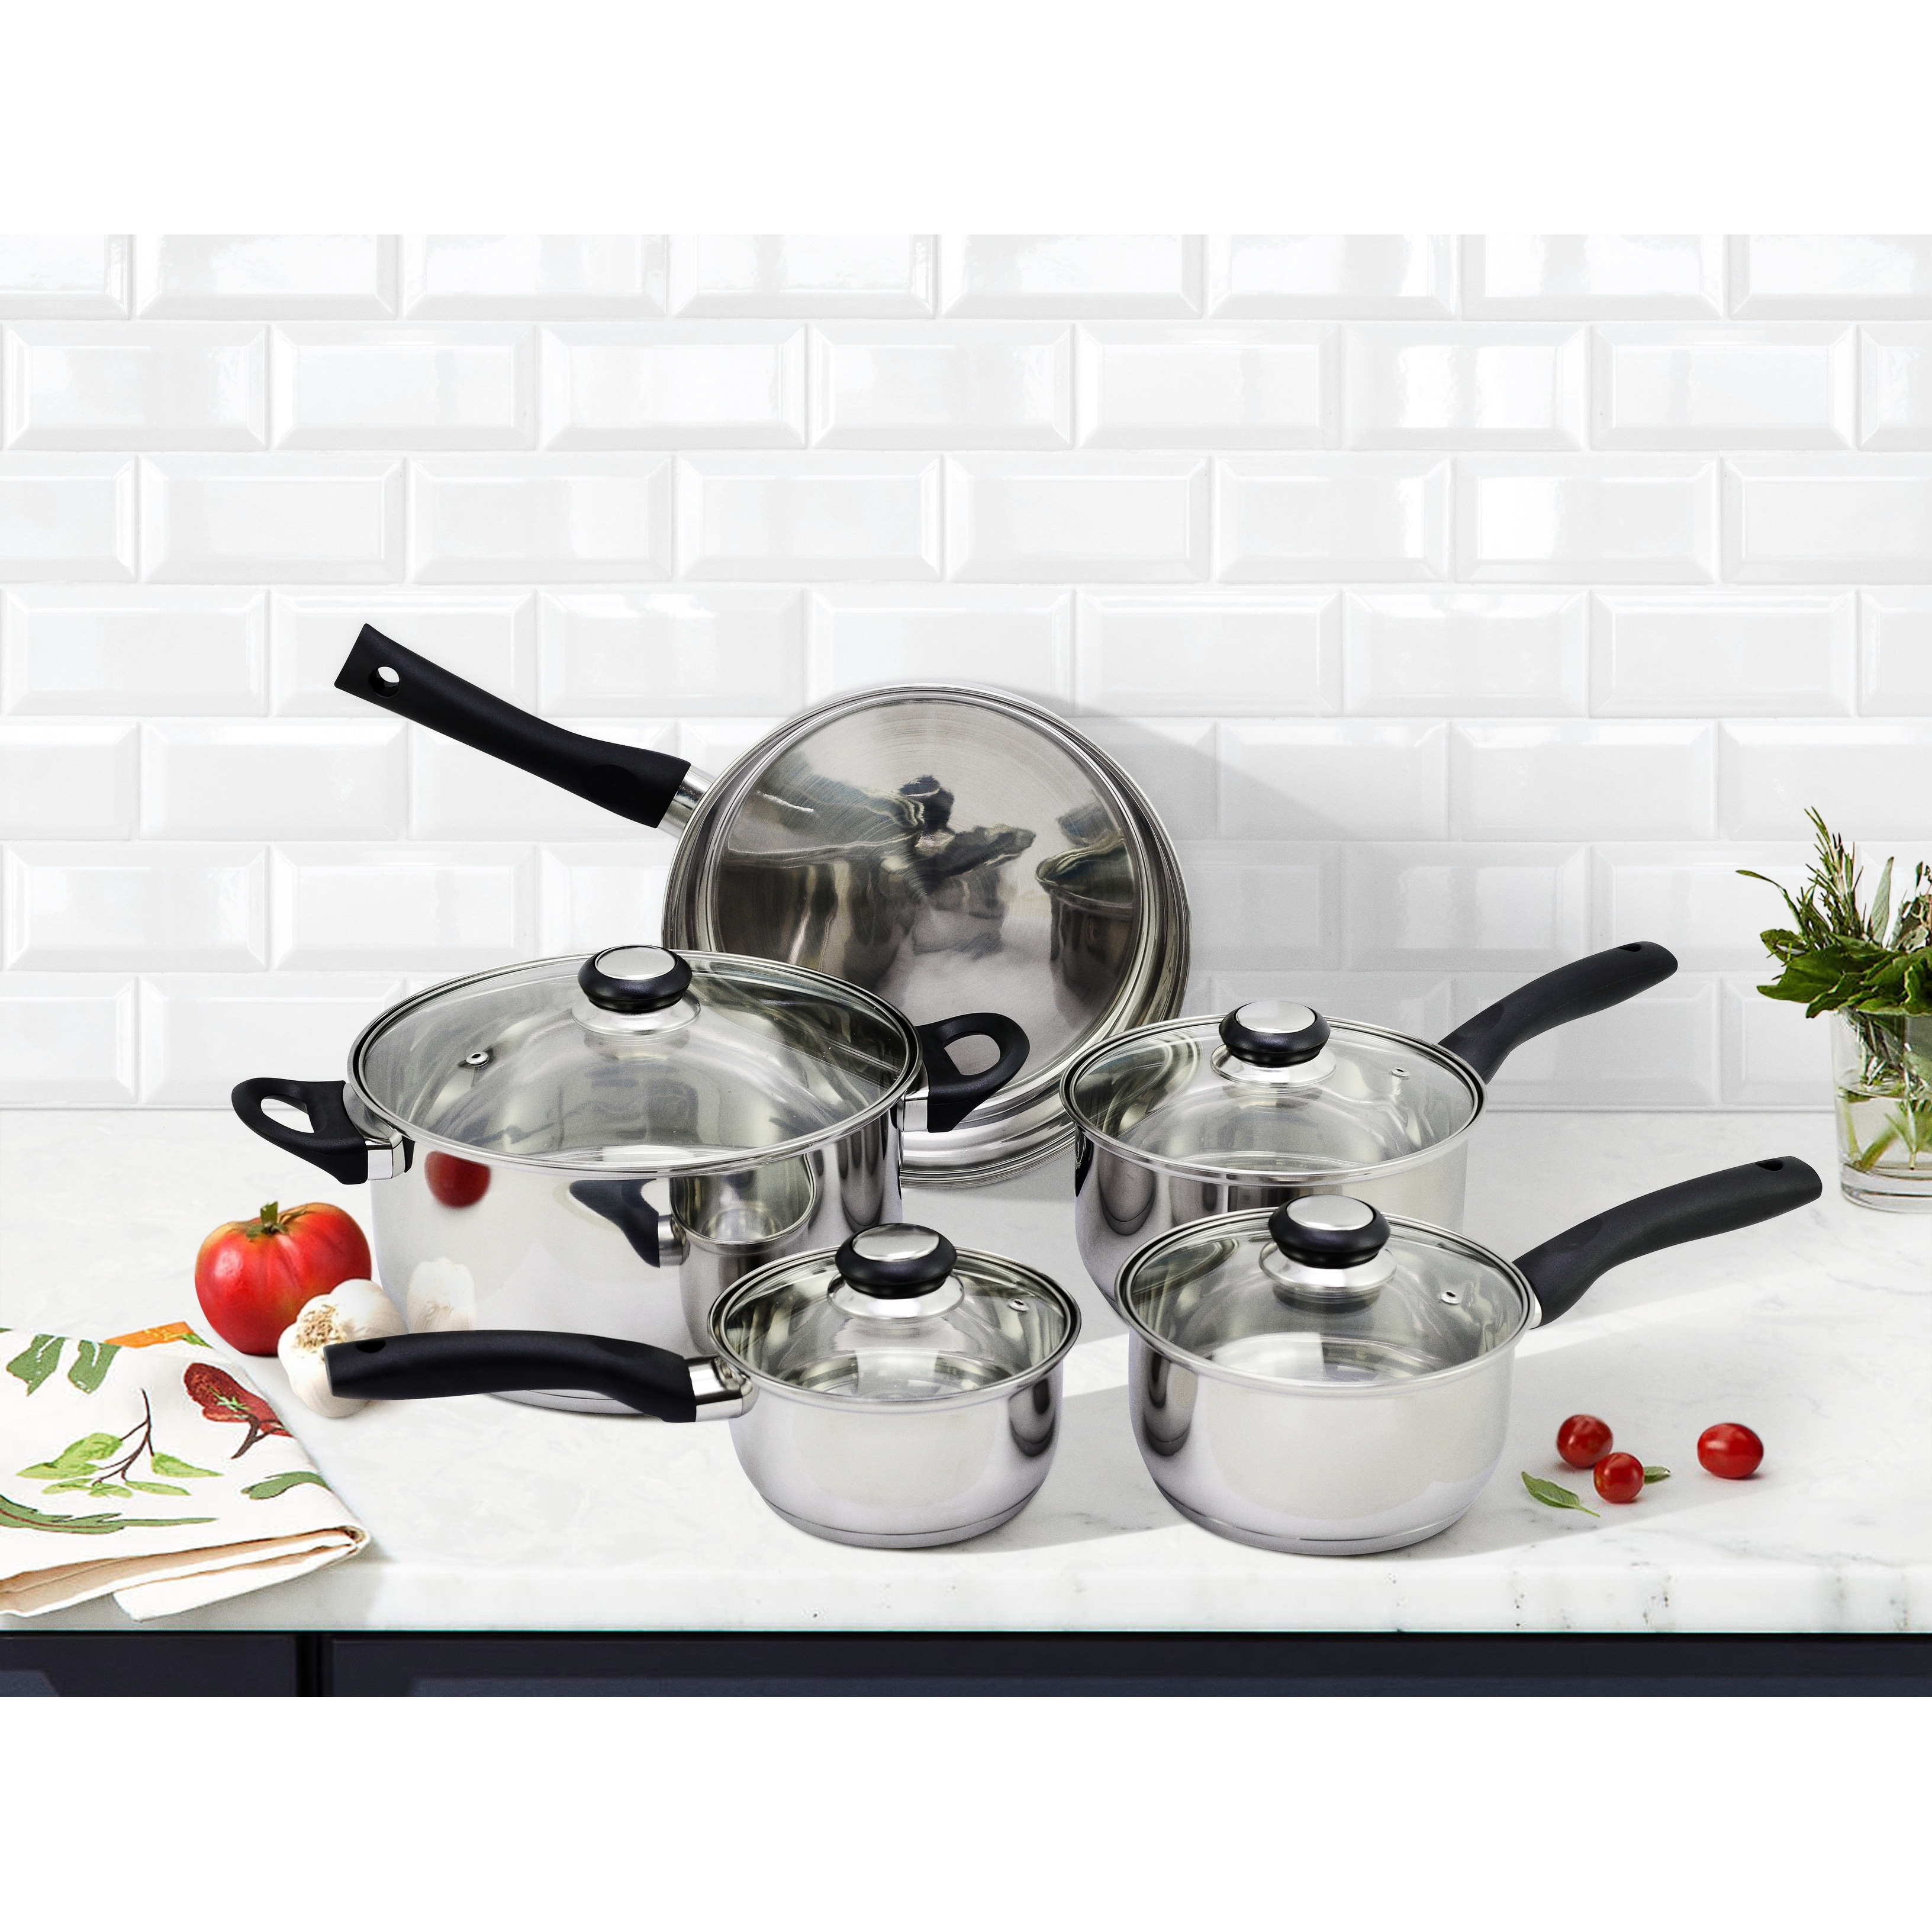 https://ak1.ostkcdn.com/images/products/is/images/direct/5c6c66f46577b9e86b04bf91784da075e3624f17/Stainless-Steel-Cookware-Set.jpg